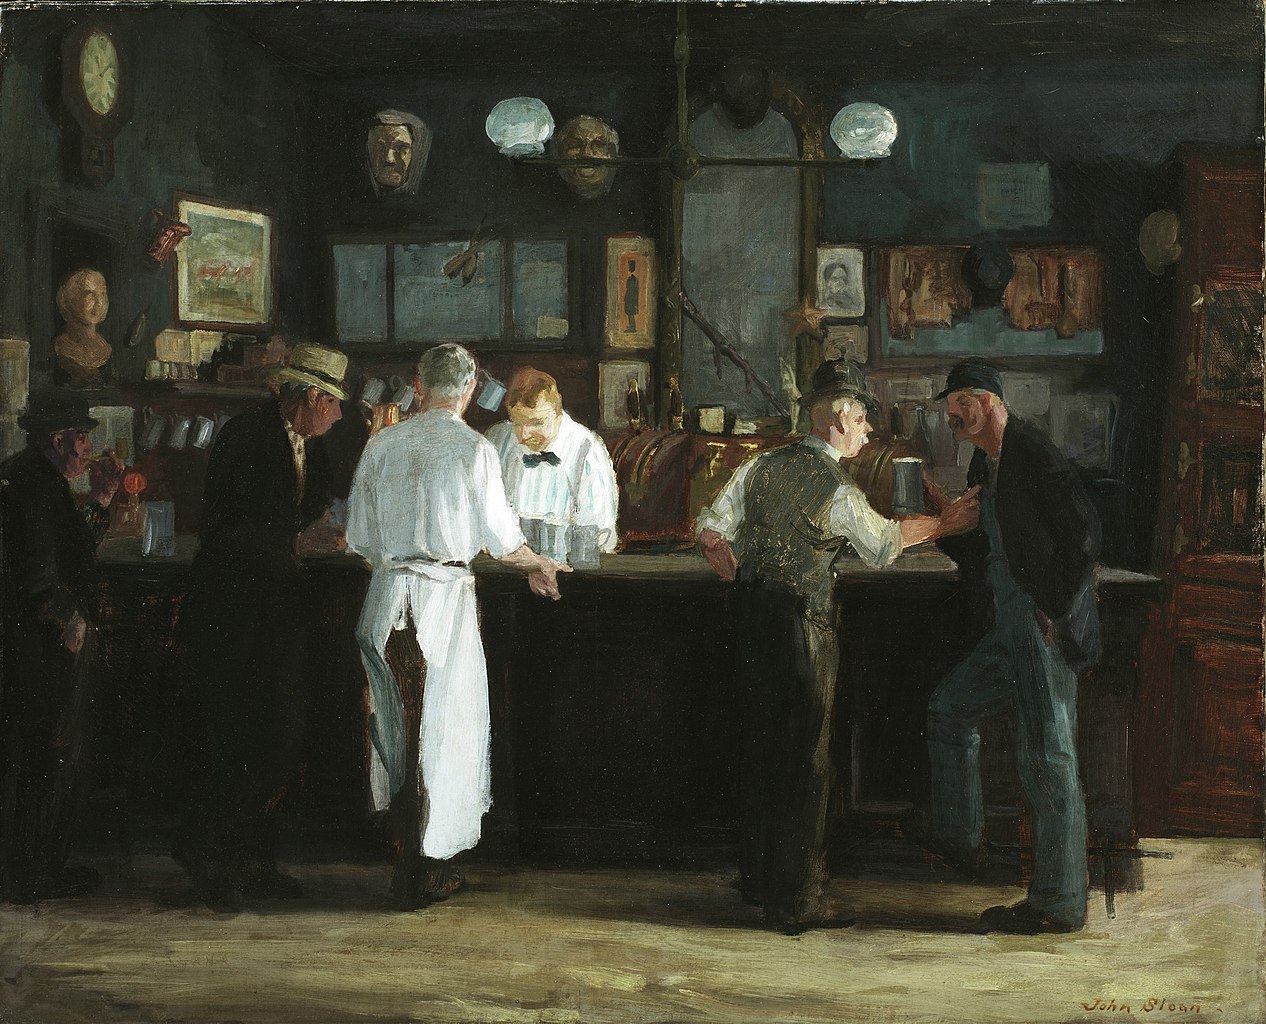 This painting depicts shows a group of men standing around a 19th century bar. Some are waiters and bartenders others are patrons.